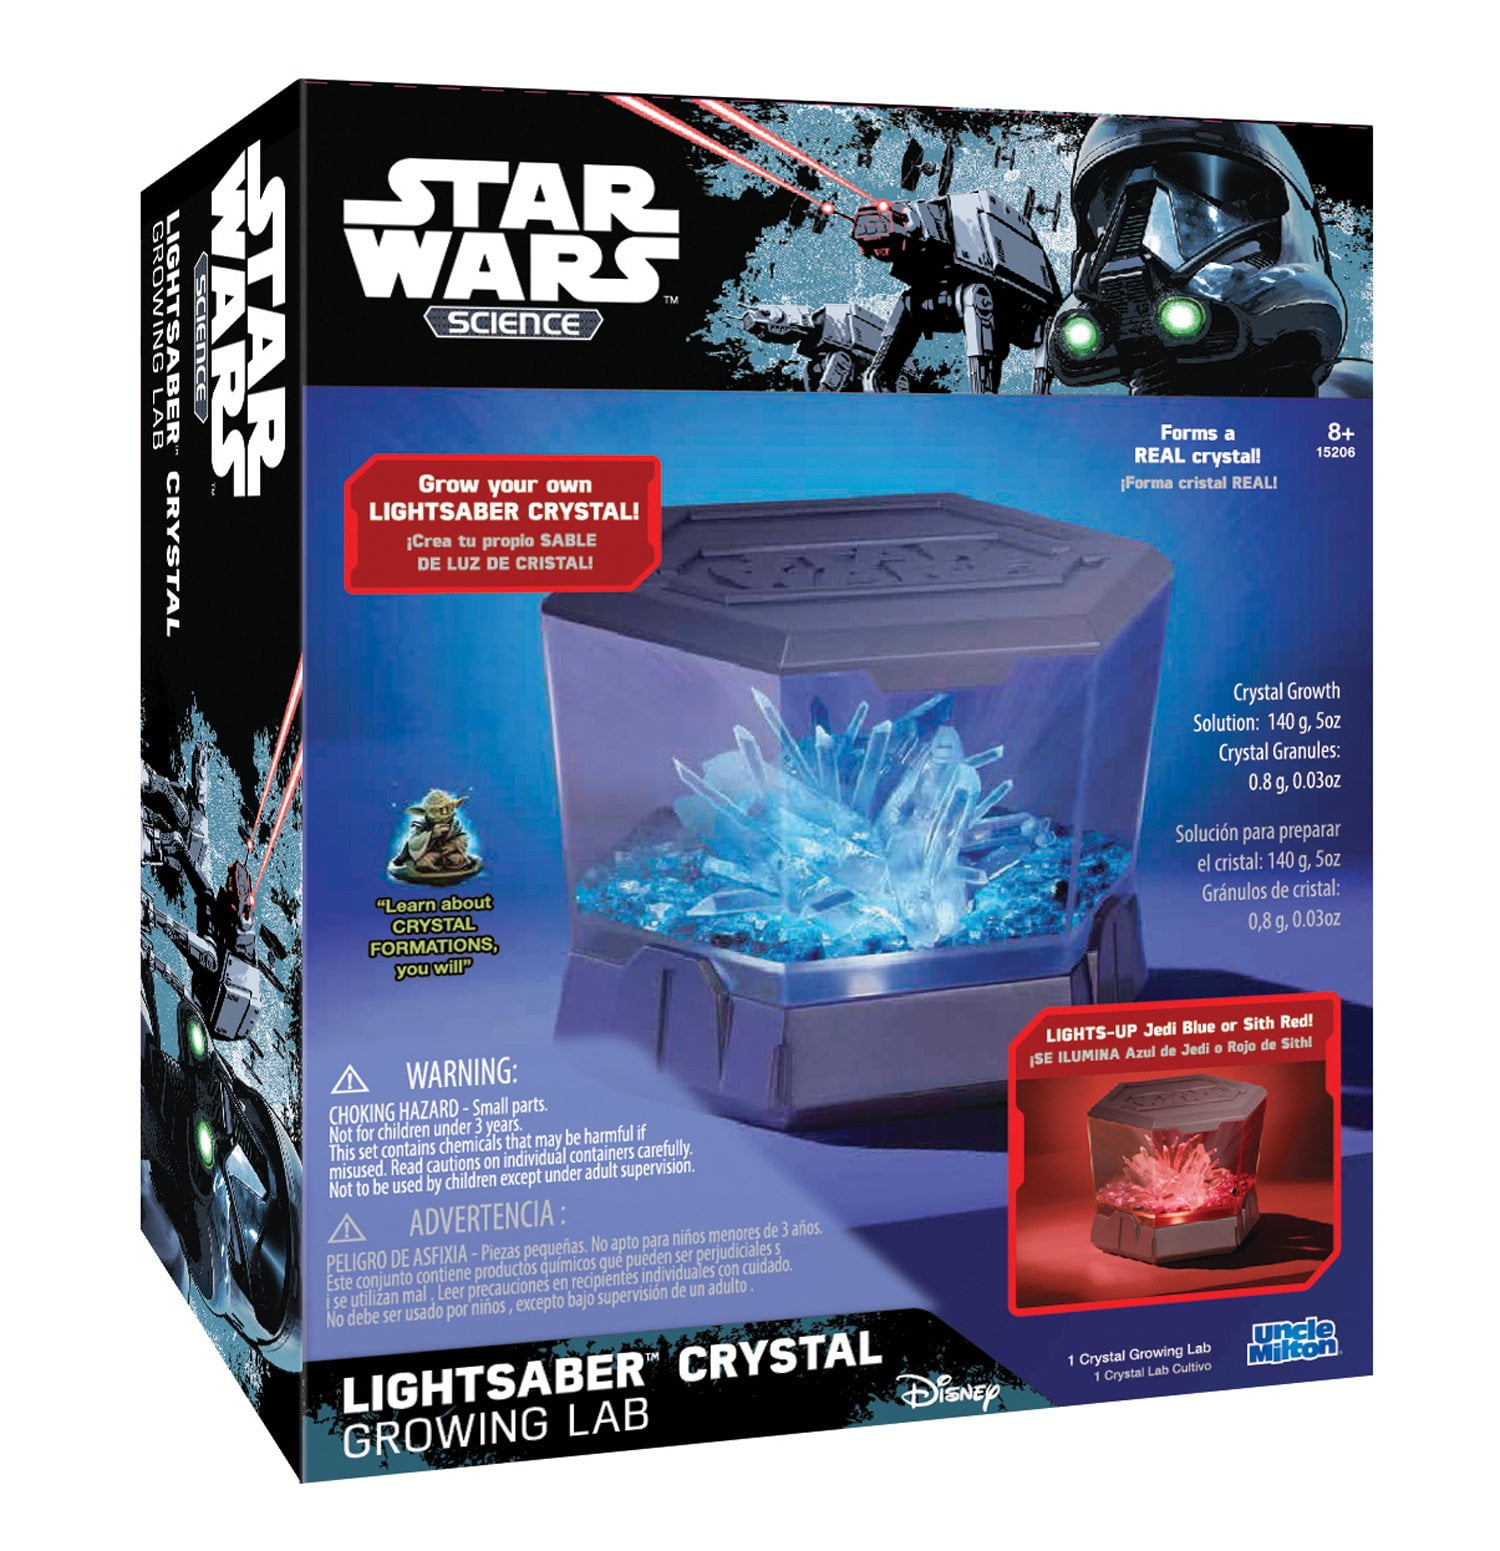 NEW Star Wars Science  Lightsaber Crystal Growing Lab FREE SHIPPING 